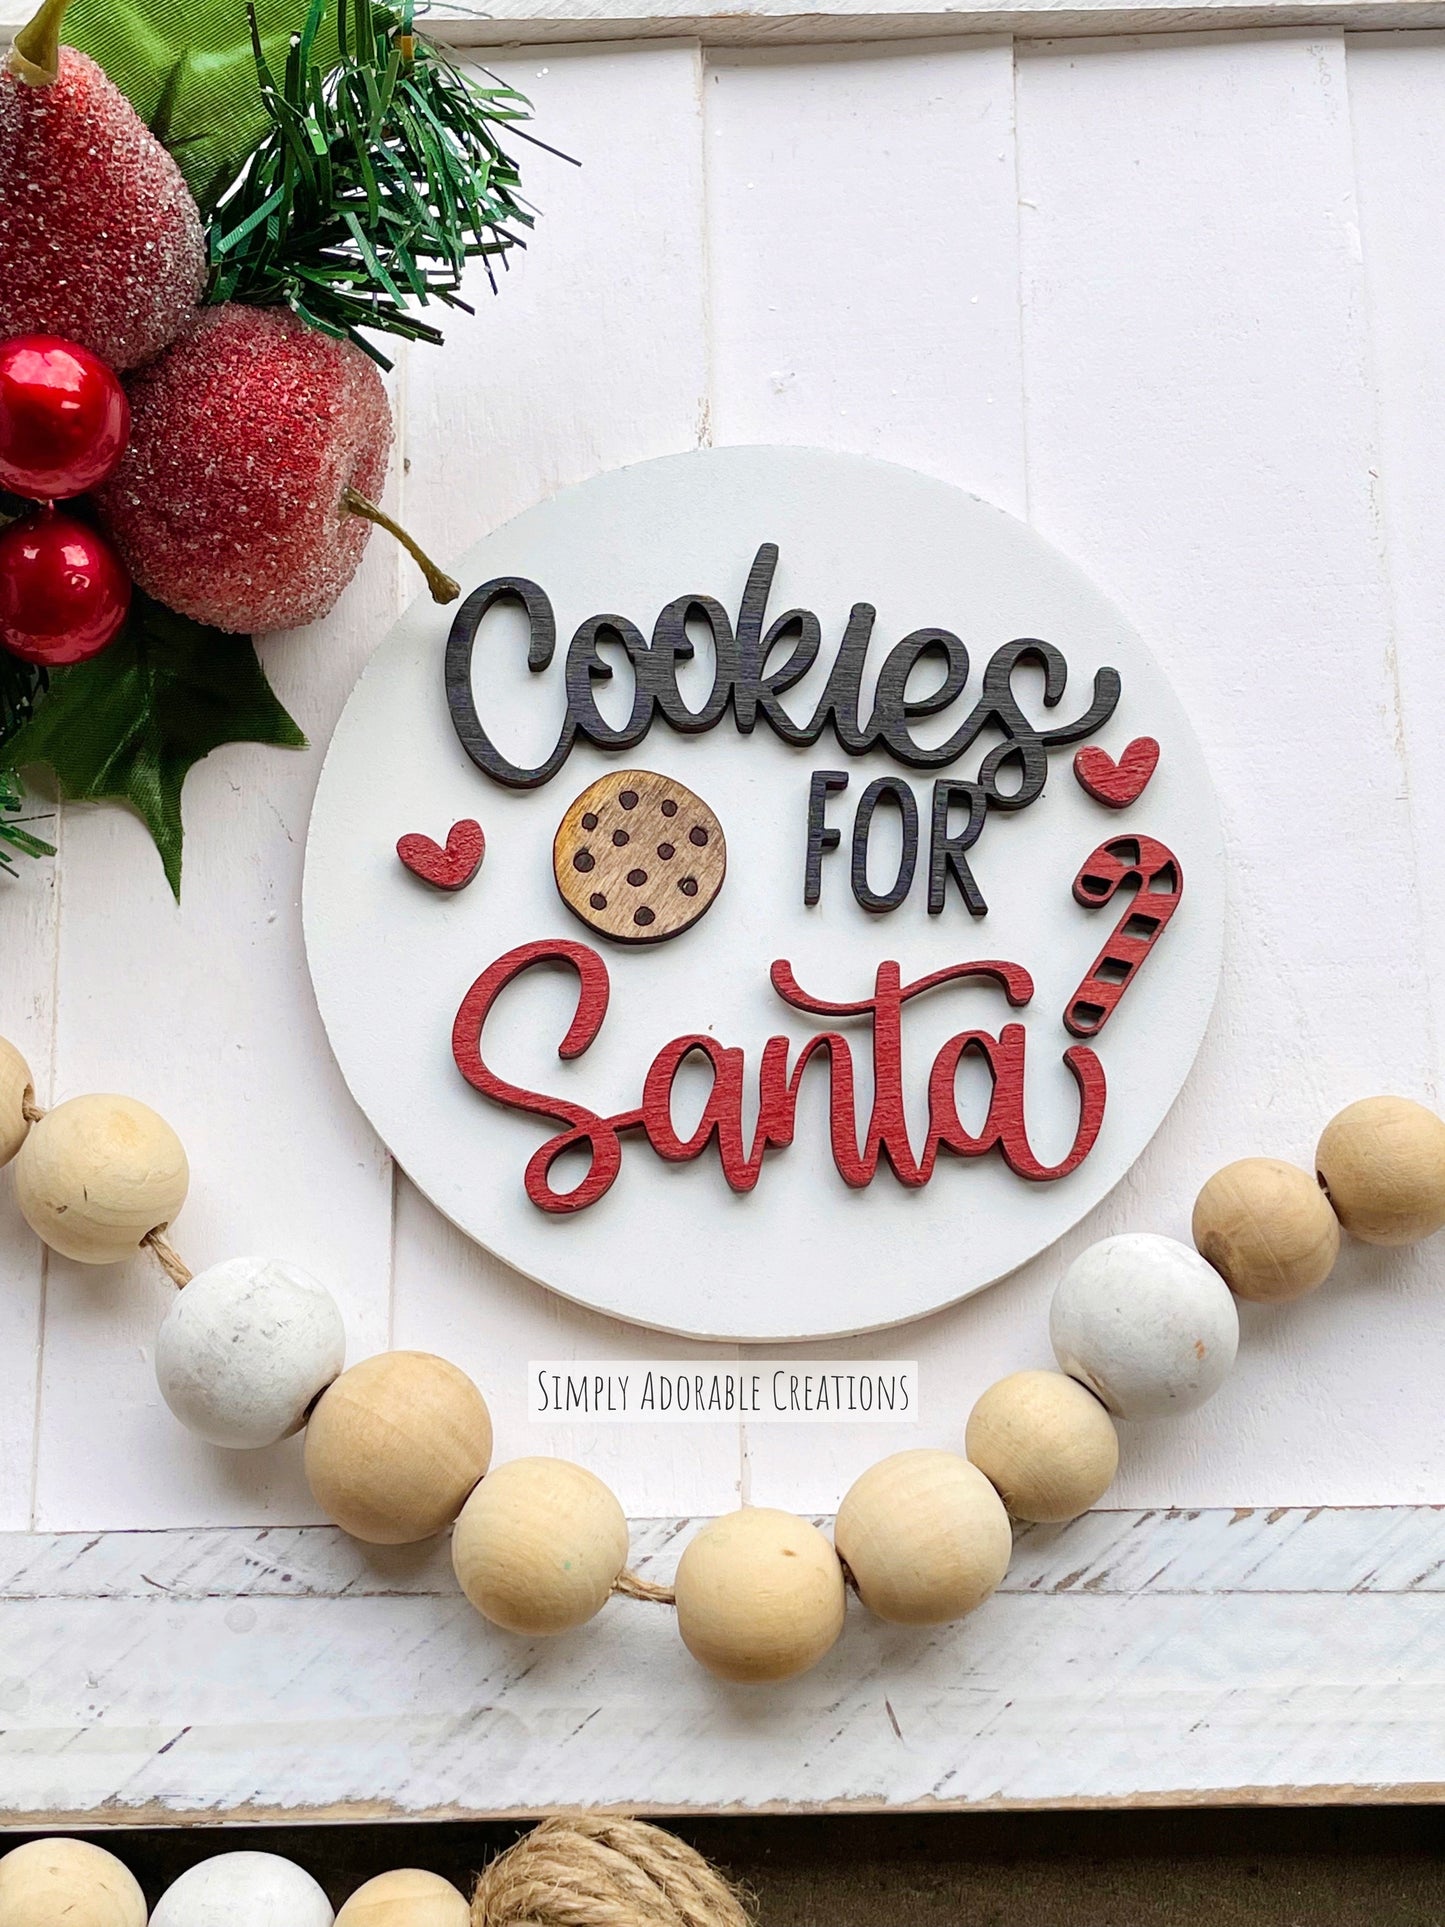 Cookies for Santa Tiered Tray